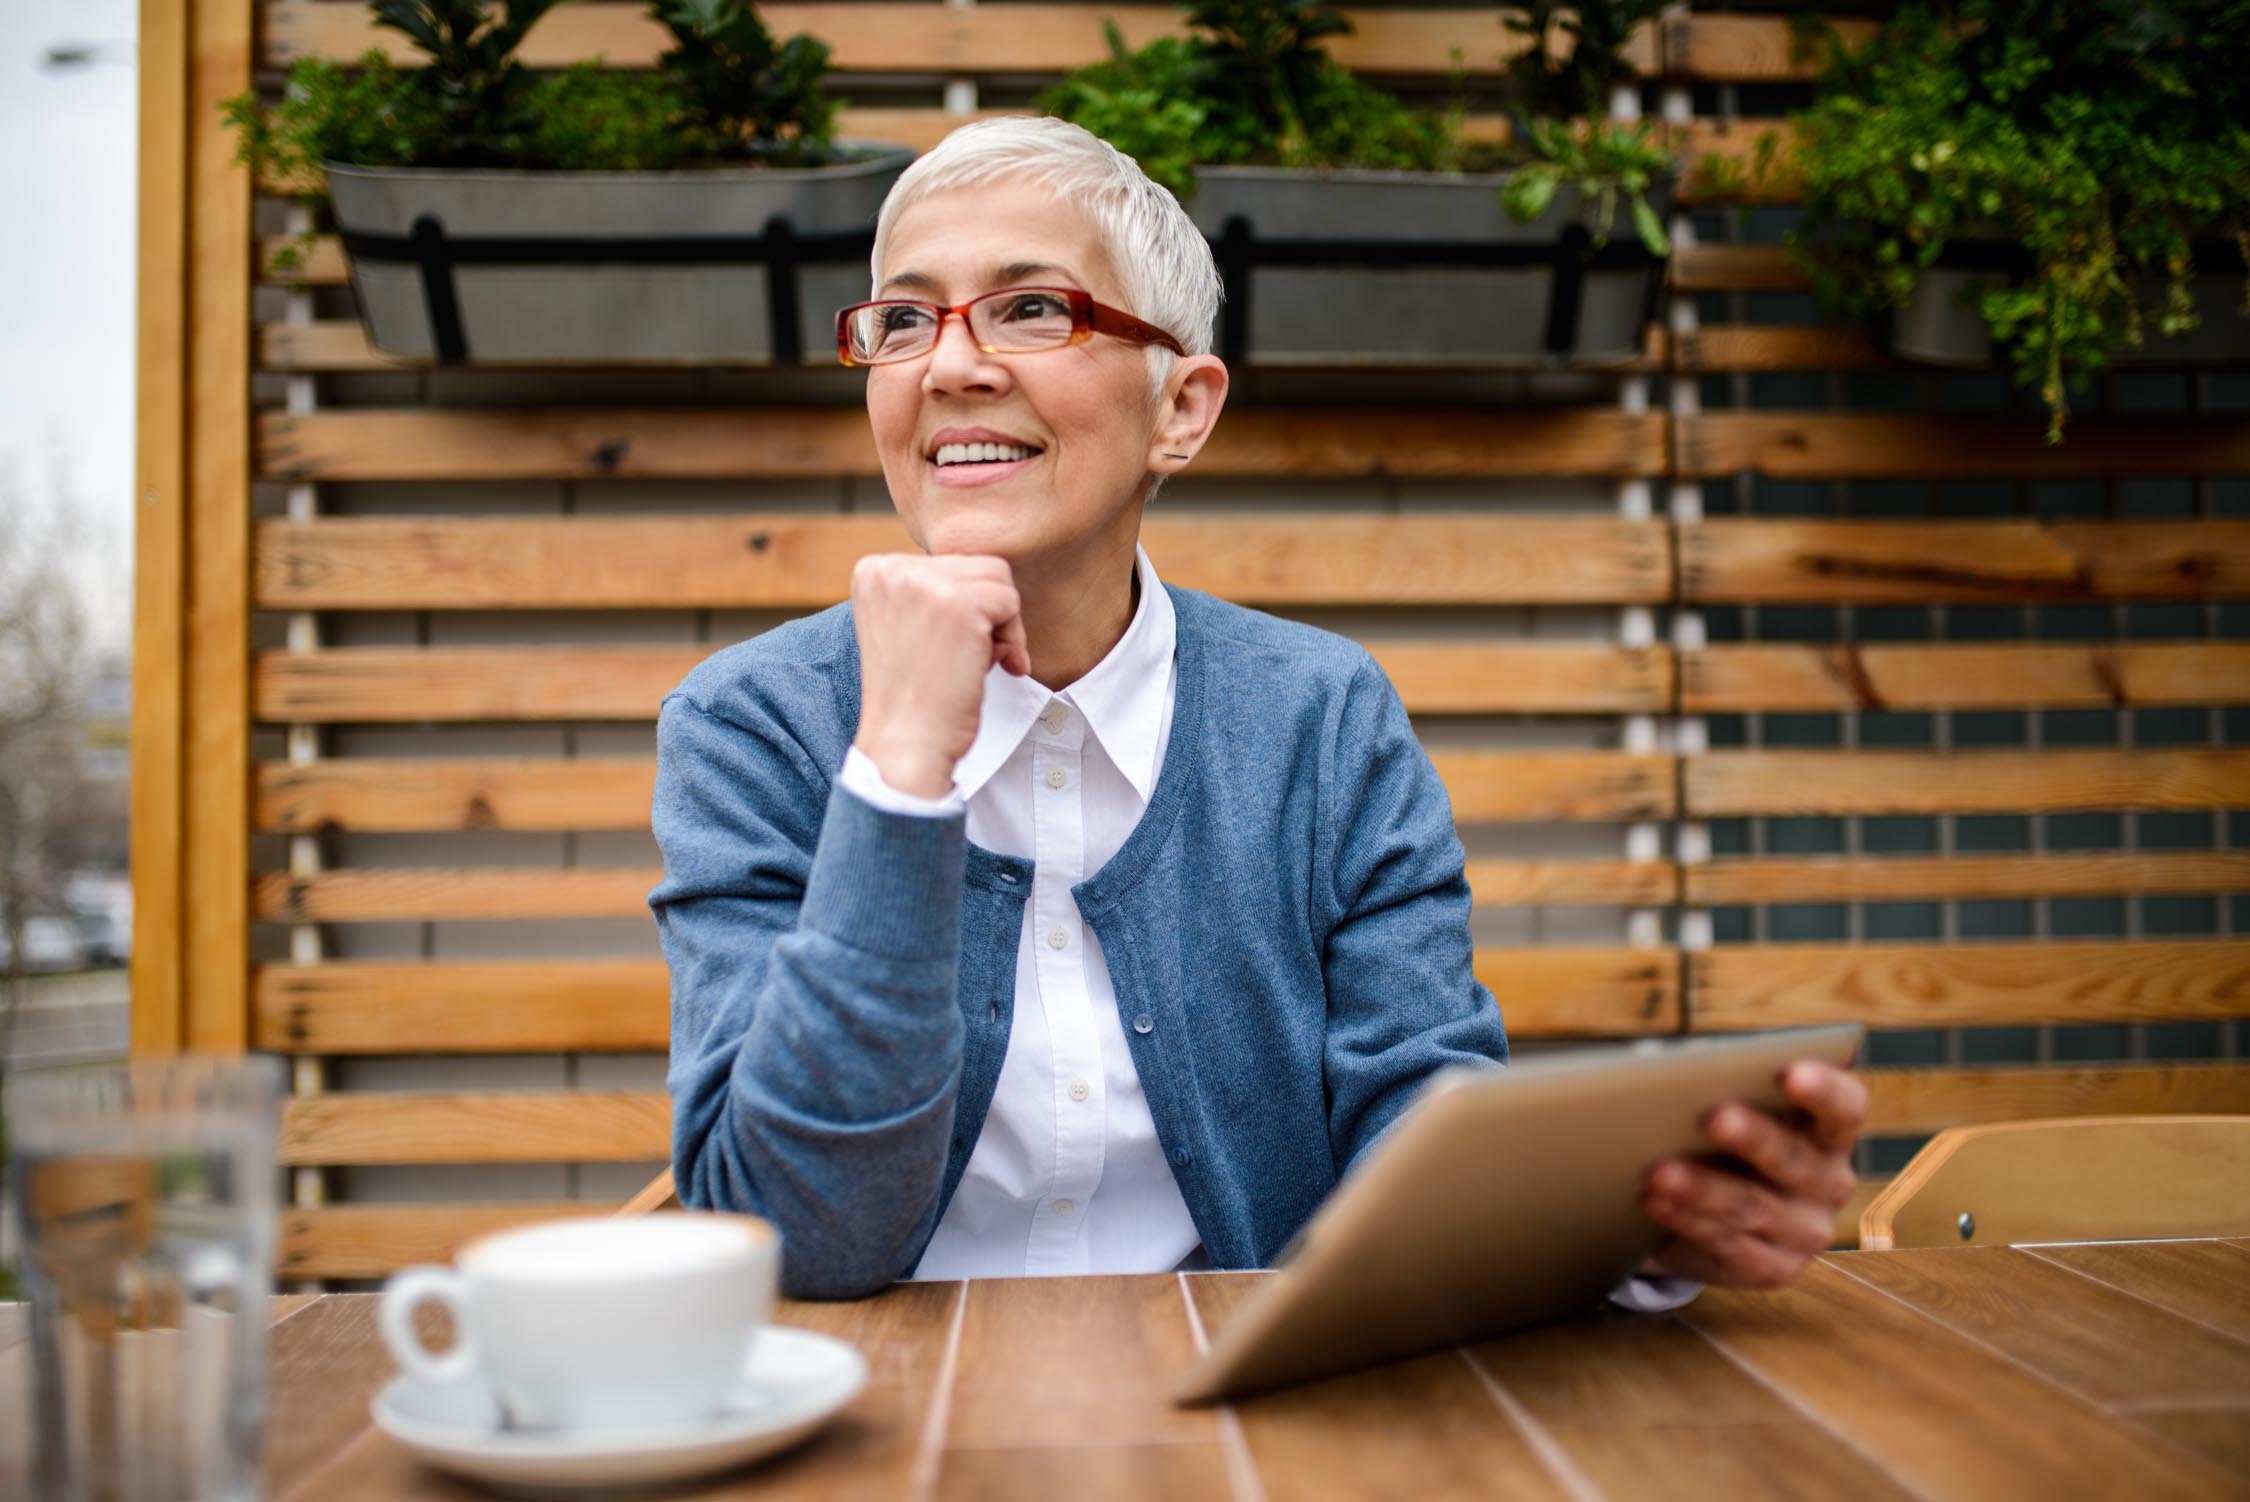 Smiling mature woman using digital tablet while drinking a coffee